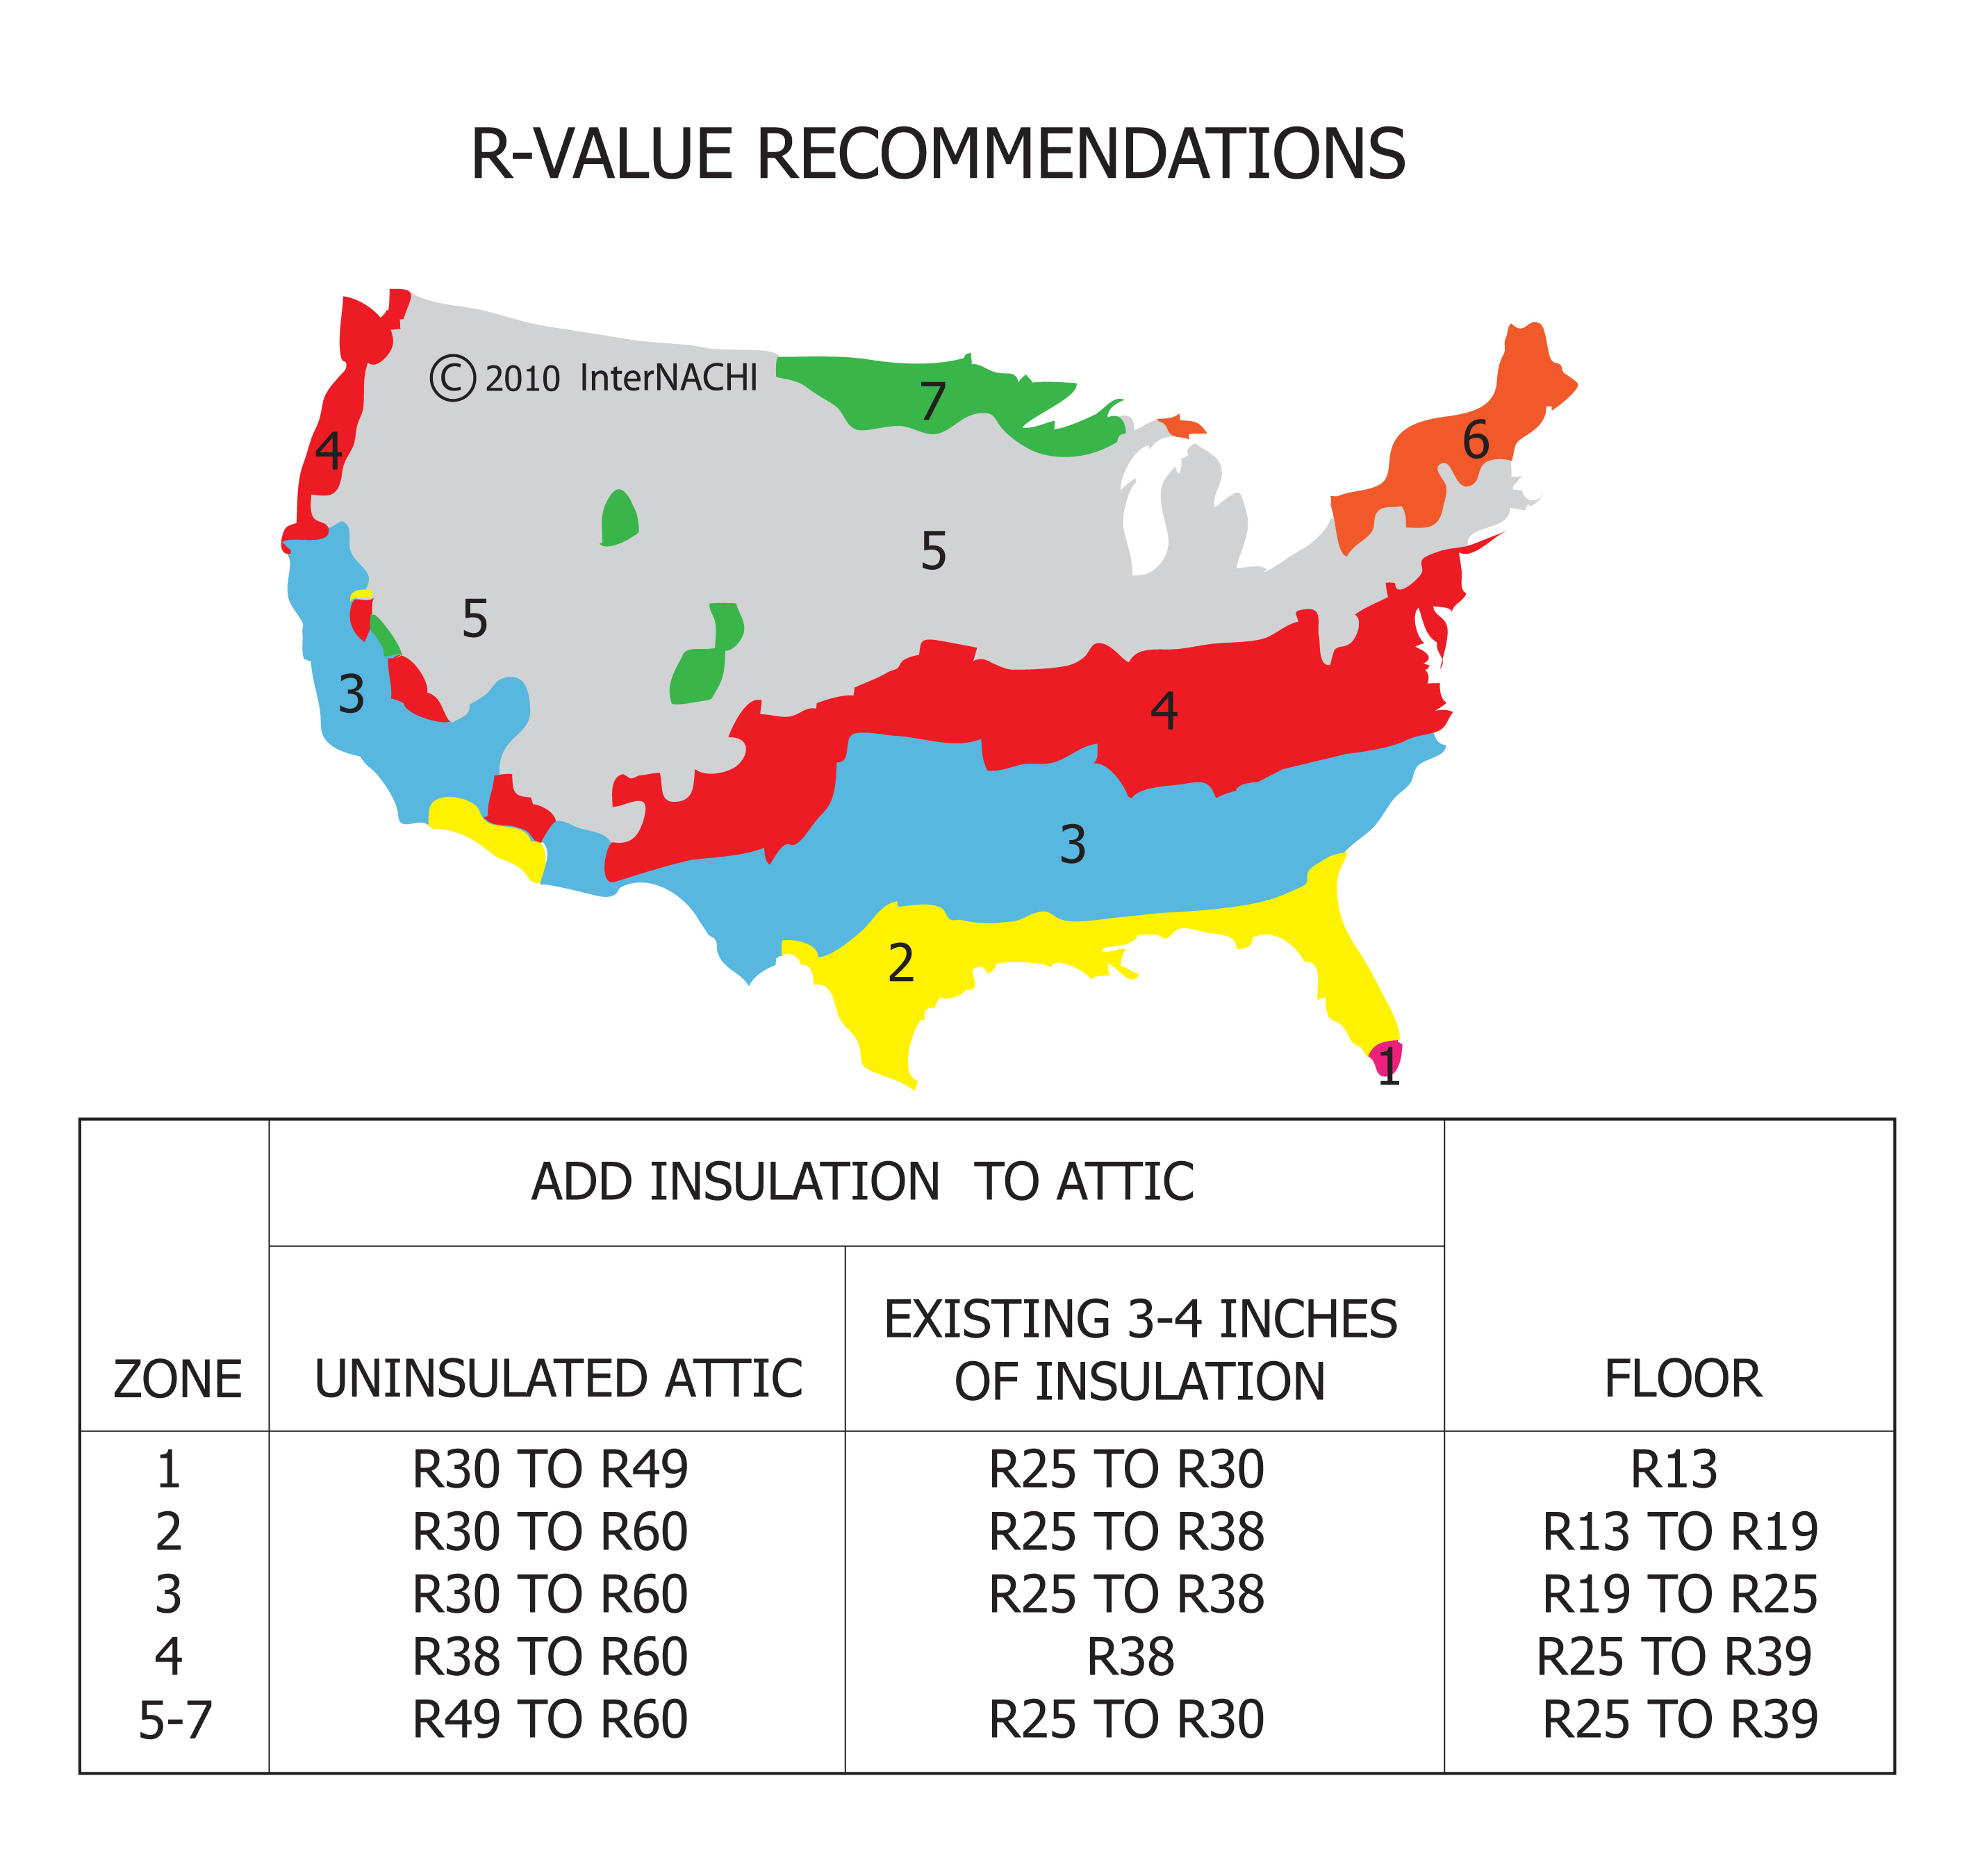 R-value recommendations.